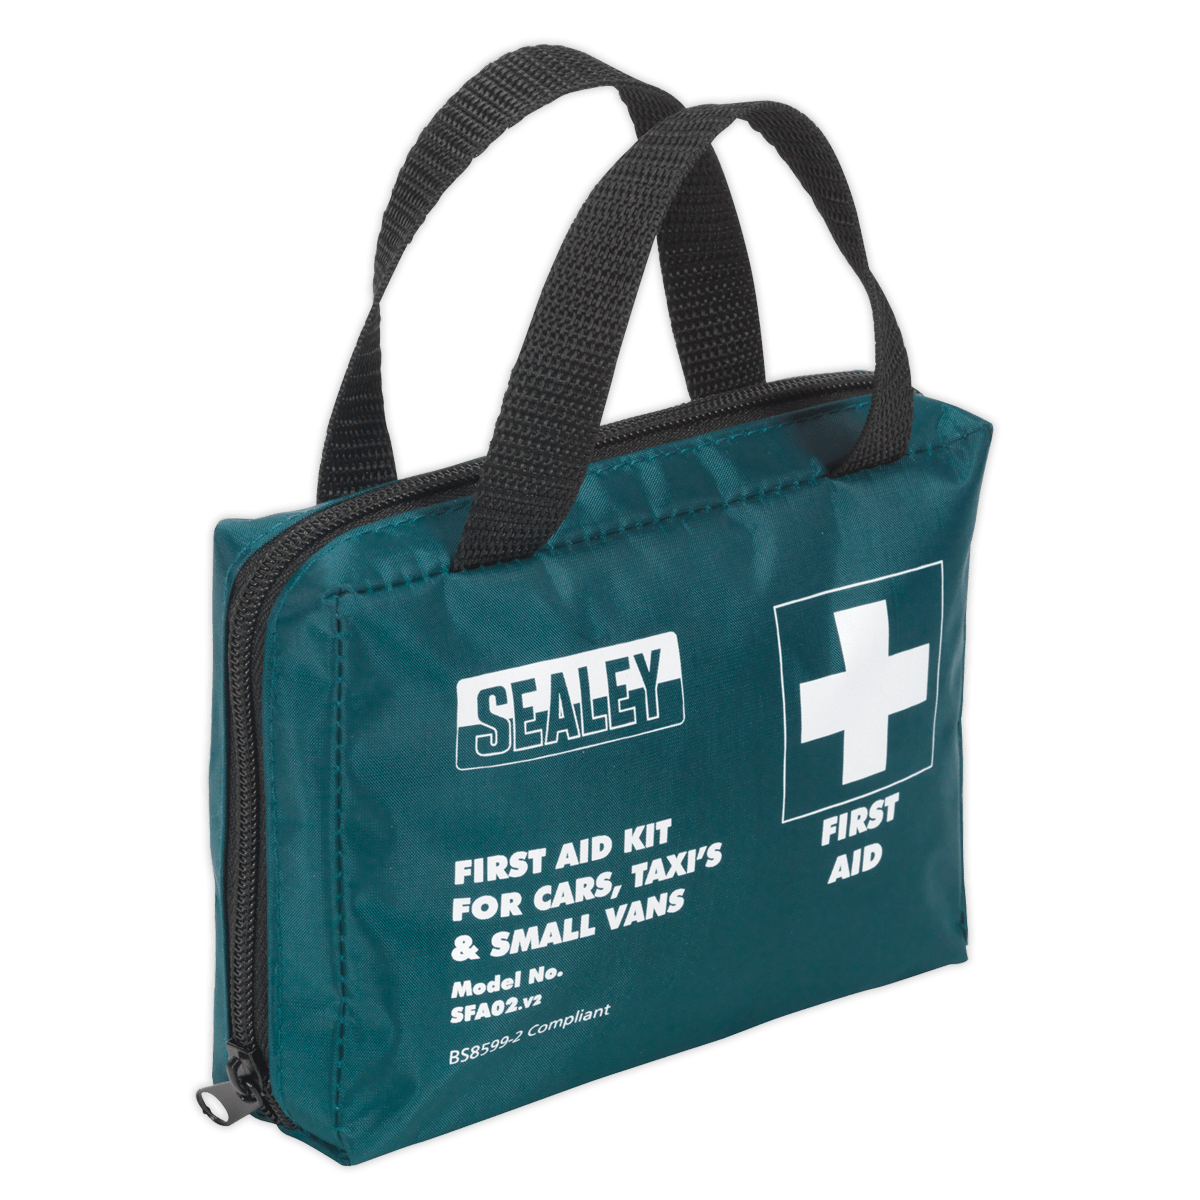 Sealey First Aid Kit Medium for Cars, Taxi's & Small Vans - BS 8599 SFA02